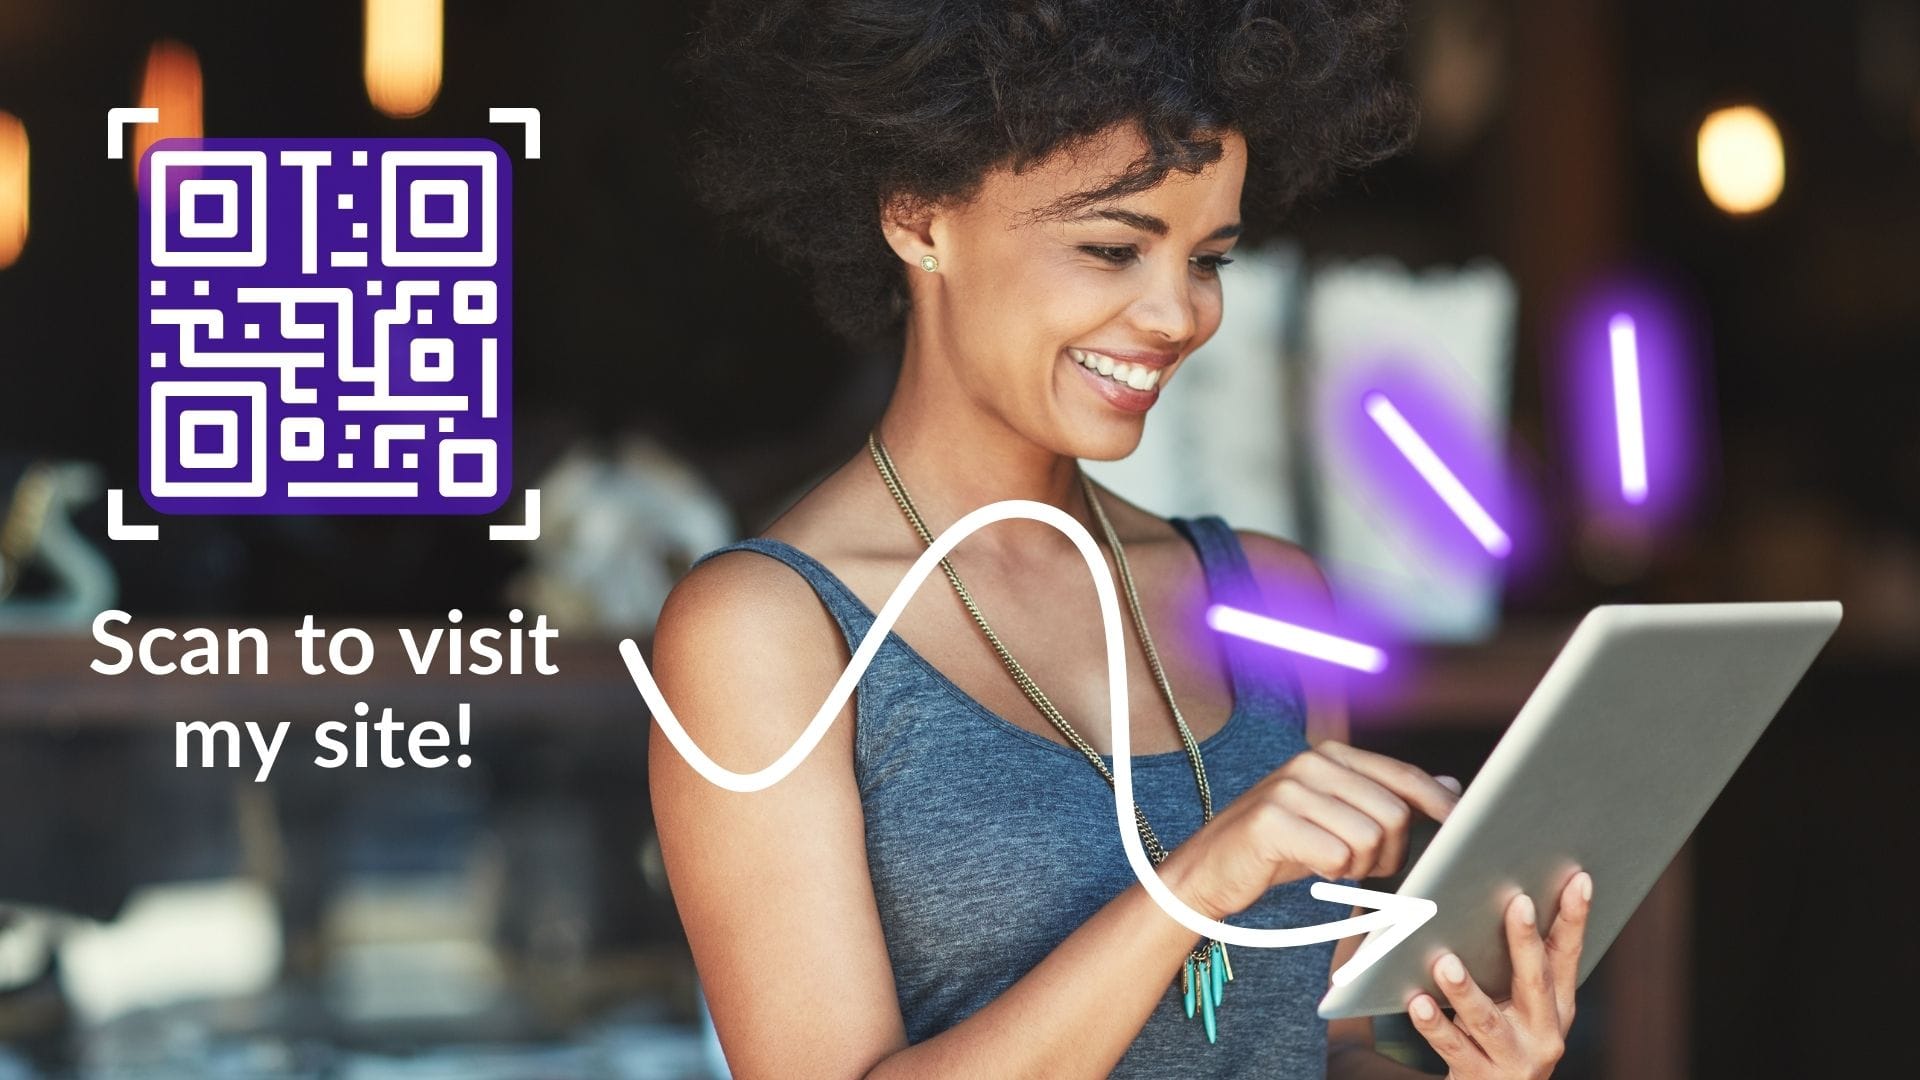 A qr code can be used to send people to website urls or a landing page.